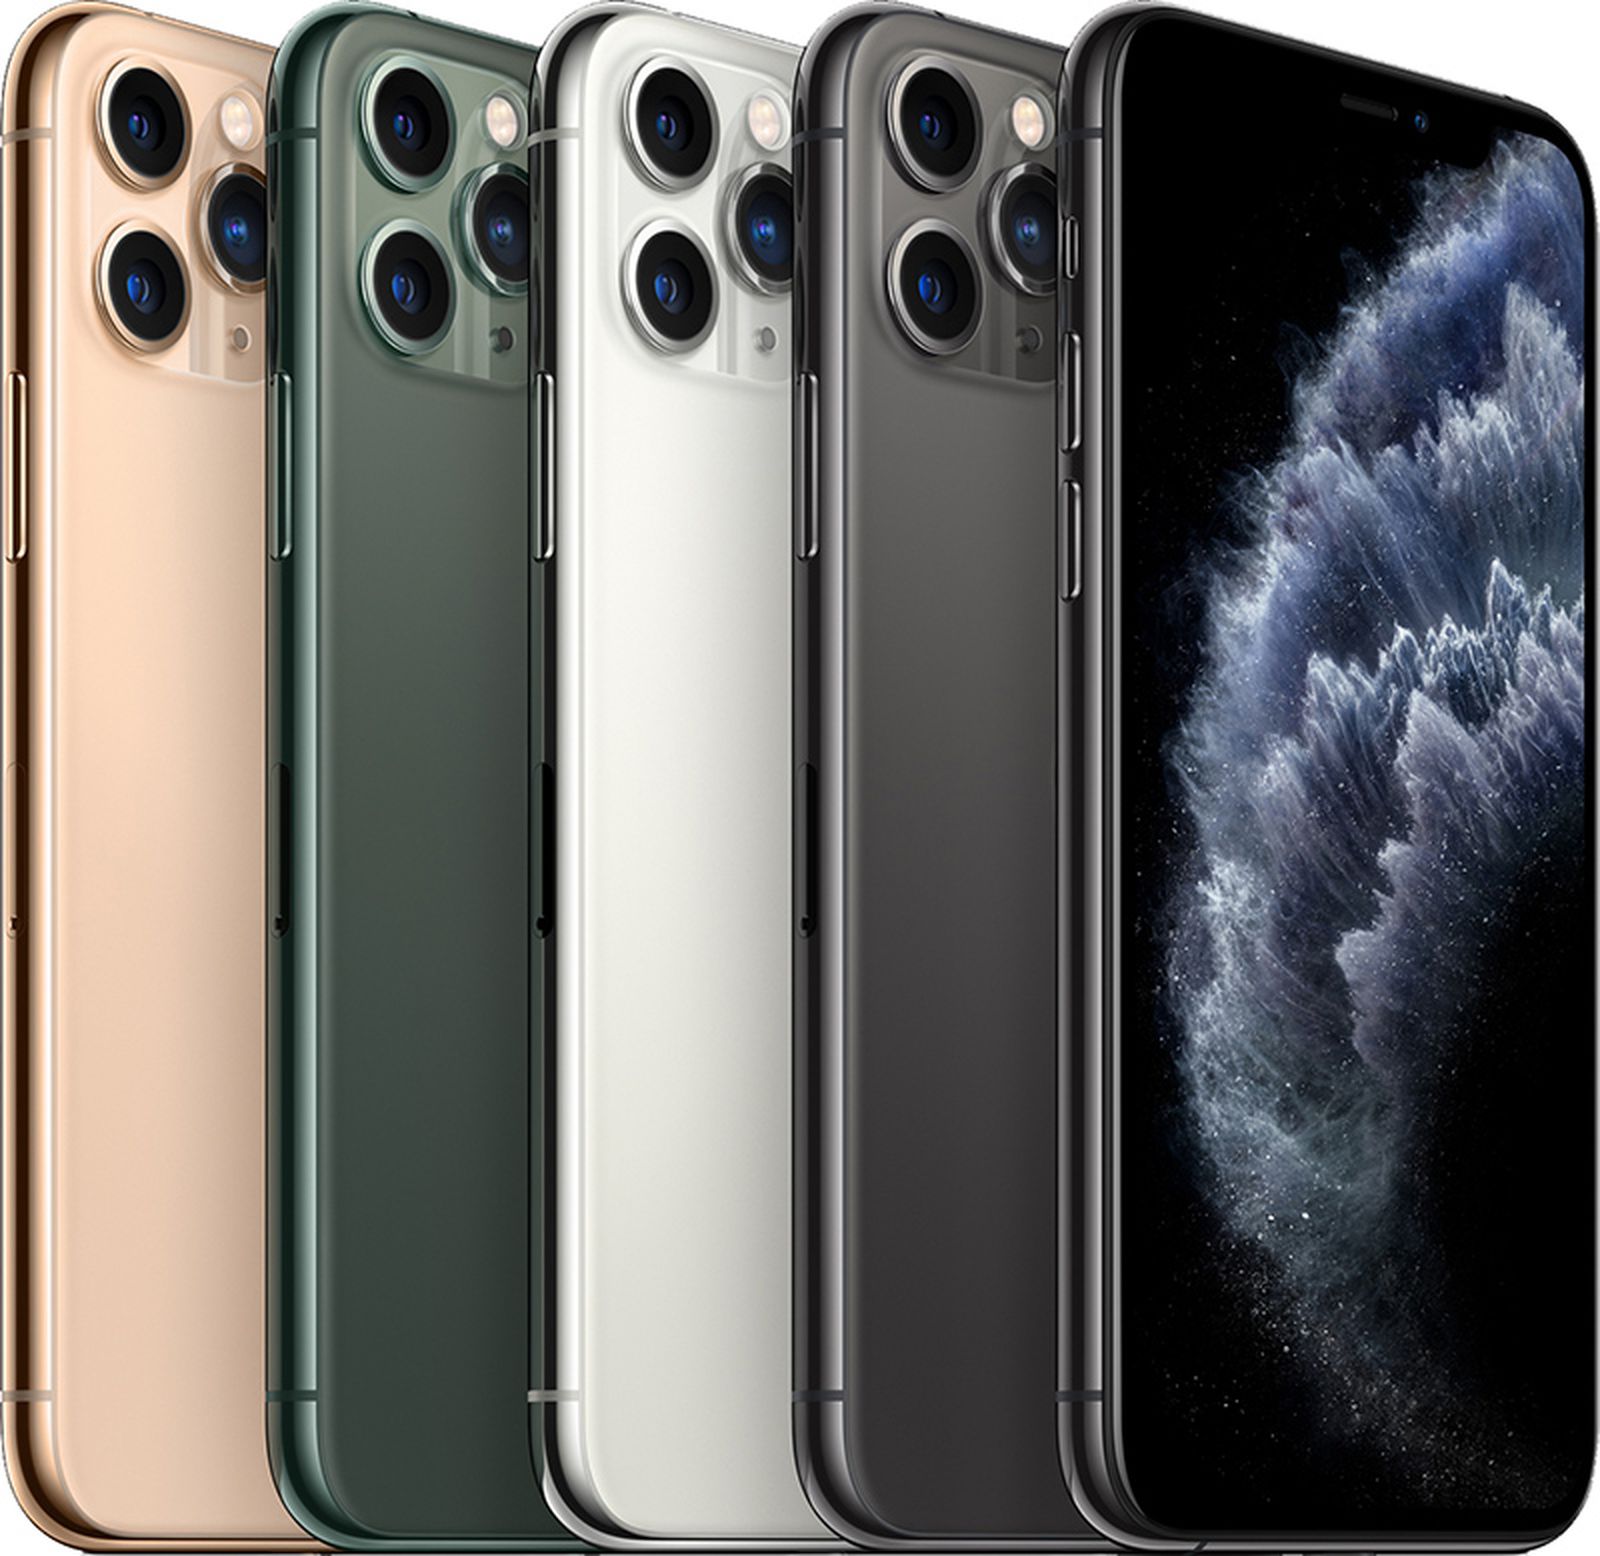 iphone-11-release-date-identifying-the-launch-date-of-iphone-11